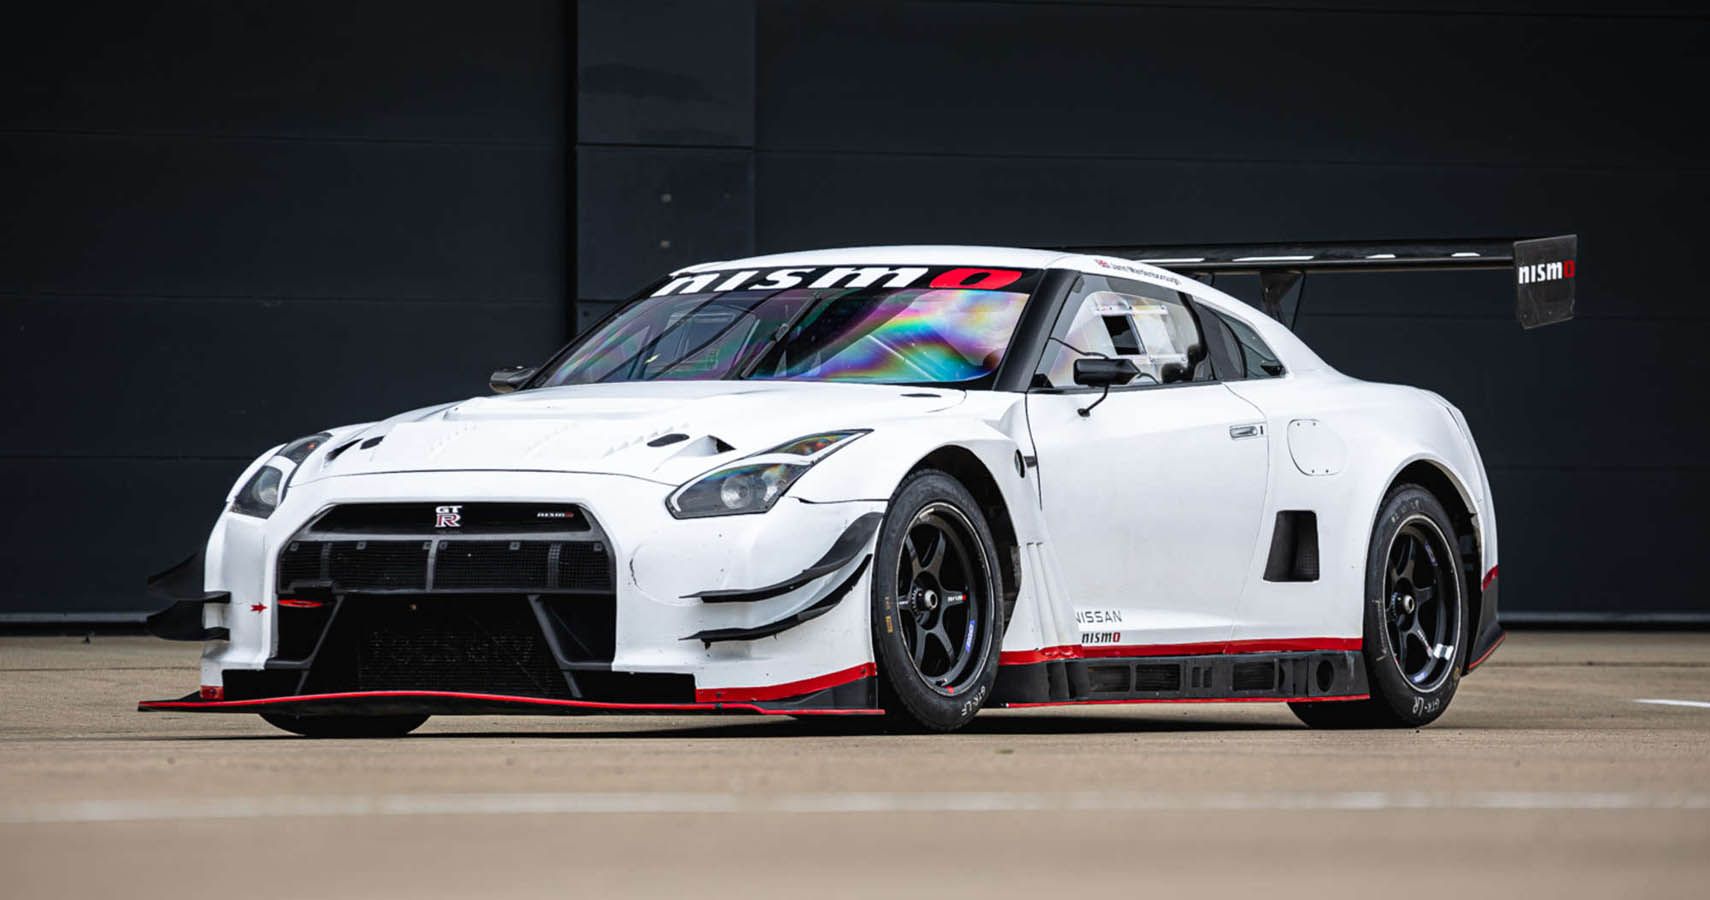 White 2014 Nissan GT-R NISMO GT3 Race Car From Gran Turismo Movie Up For Auction